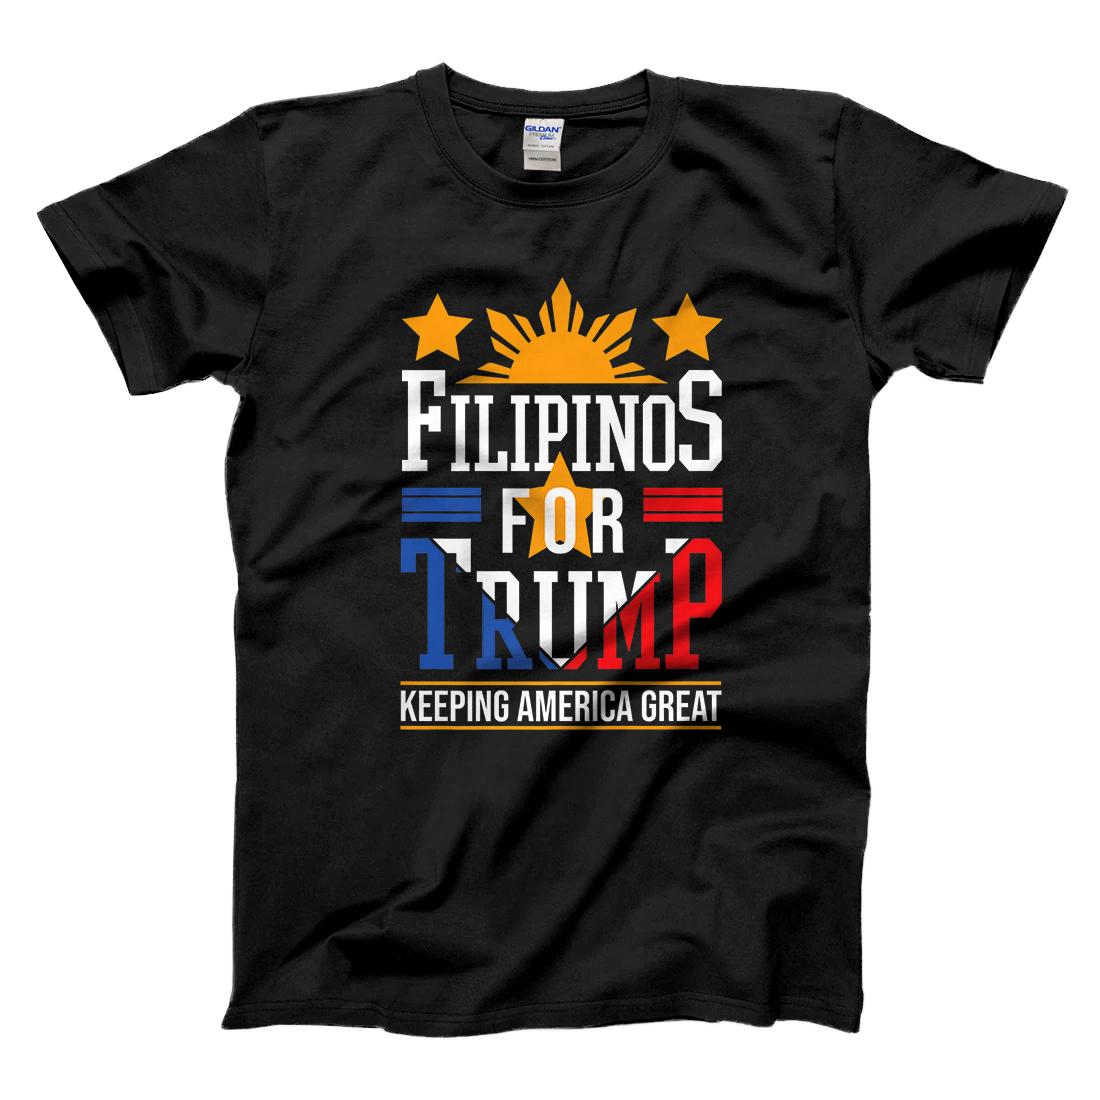 Personalized Filipinos For Trump Philippines Keeping America Great Premium T-Shirt